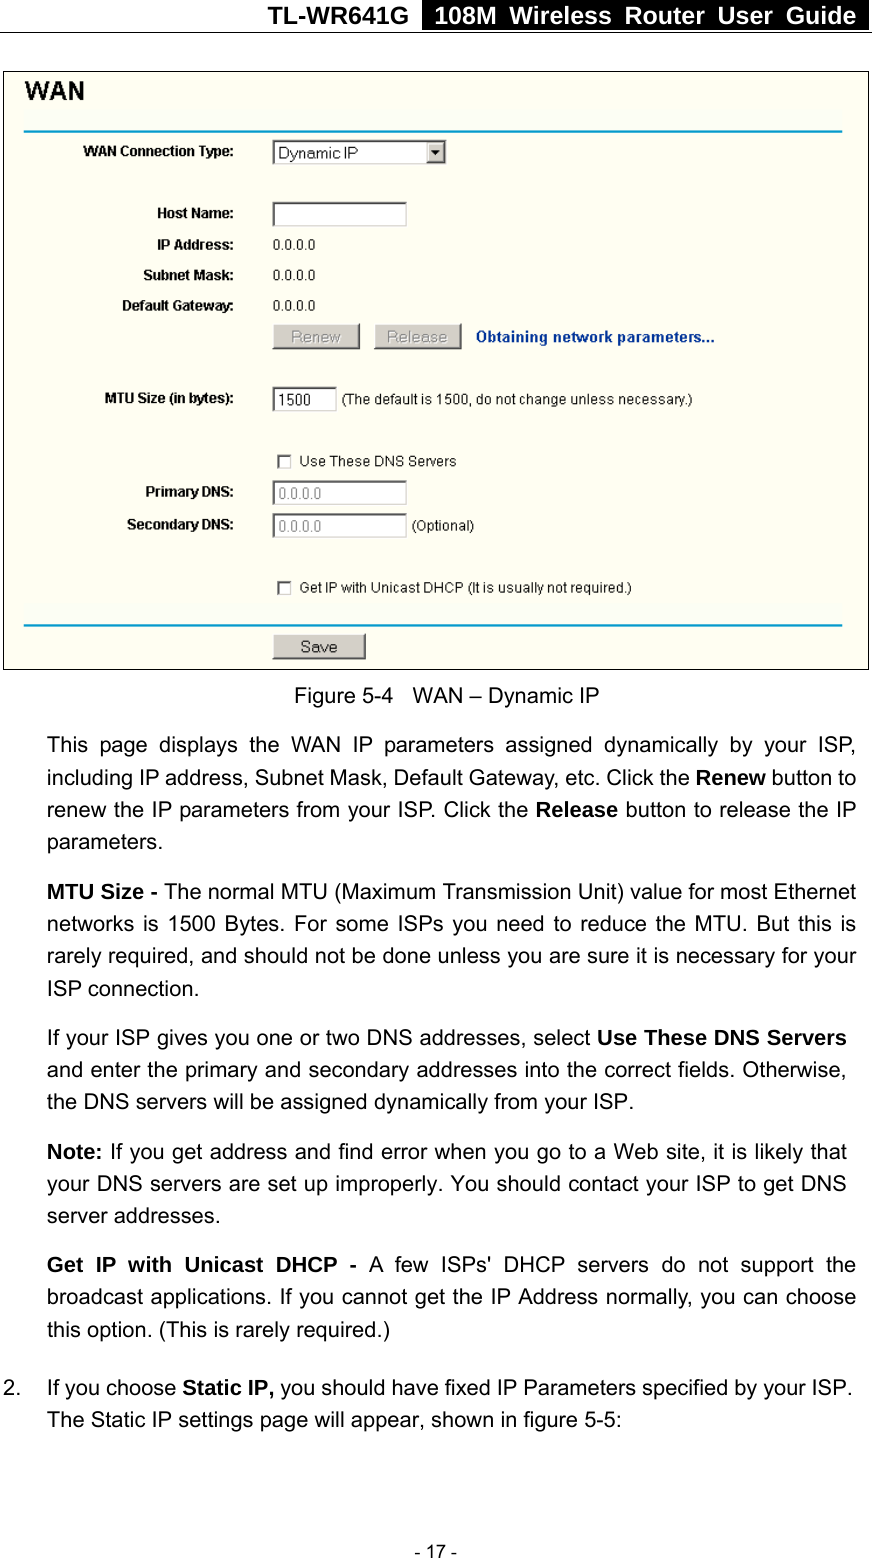 TL-WR641G   108M Wireless Router User Guide   Figure 5-4  WAN – Dynamic IP This page displays the WAN IP parameters assigned dynamically by your ISP, including IP address, Subnet Mask, Default Gateway, etc. Click the Renew button to renew the IP parameters from your ISP. Click the Release button to release the IP parameters. MTU Size - The normal MTU (Maximum Transmission Unit) value for most Ethernet networks is 1500 Bytes. For some ISPs you need to reduce the MTU. But this is rarely required, and should not be done unless you are sure it is necessary for your ISP connection. If your ISP gives you one or two DNS addresses, select Use These DNS Servers and enter the primary and secondary addresses into the correct fields. Otherwise, the DNS servers will be assigned dynamically from your ISP.  Note: If you get address and find error when you go to a Web site, it is likely that your DNS servers are set up improperly. You should contact your ISP to get DNS server addresses.   Get IP with Unicast DHCP - A few ISPs&apos; DHCP servers do not support the broadcast applications. If you cannot get the IP Address normally, you can choose this option. (This is rarely required.) 2.  If you choose Static IP, you should have fixed IP Parameters specified by your ISP. The Static IP settings page will appear, shown in figure 5-5:  - 17 - 